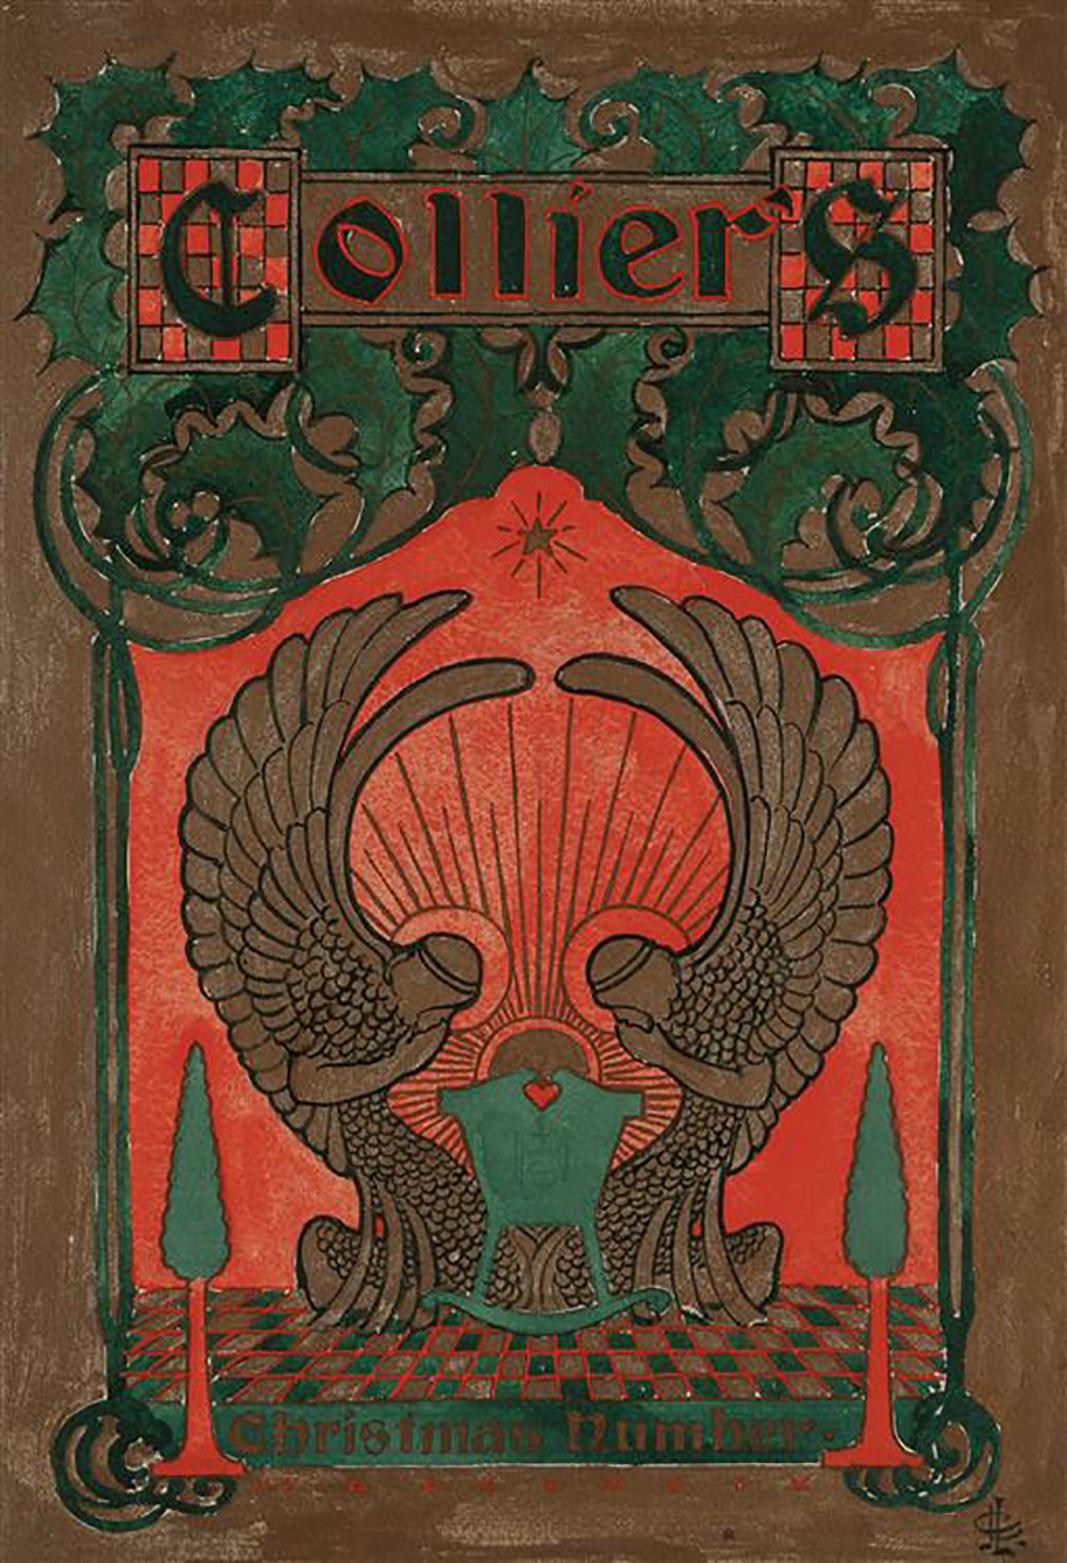 Collier's Christmas Number, Unpublished Cover